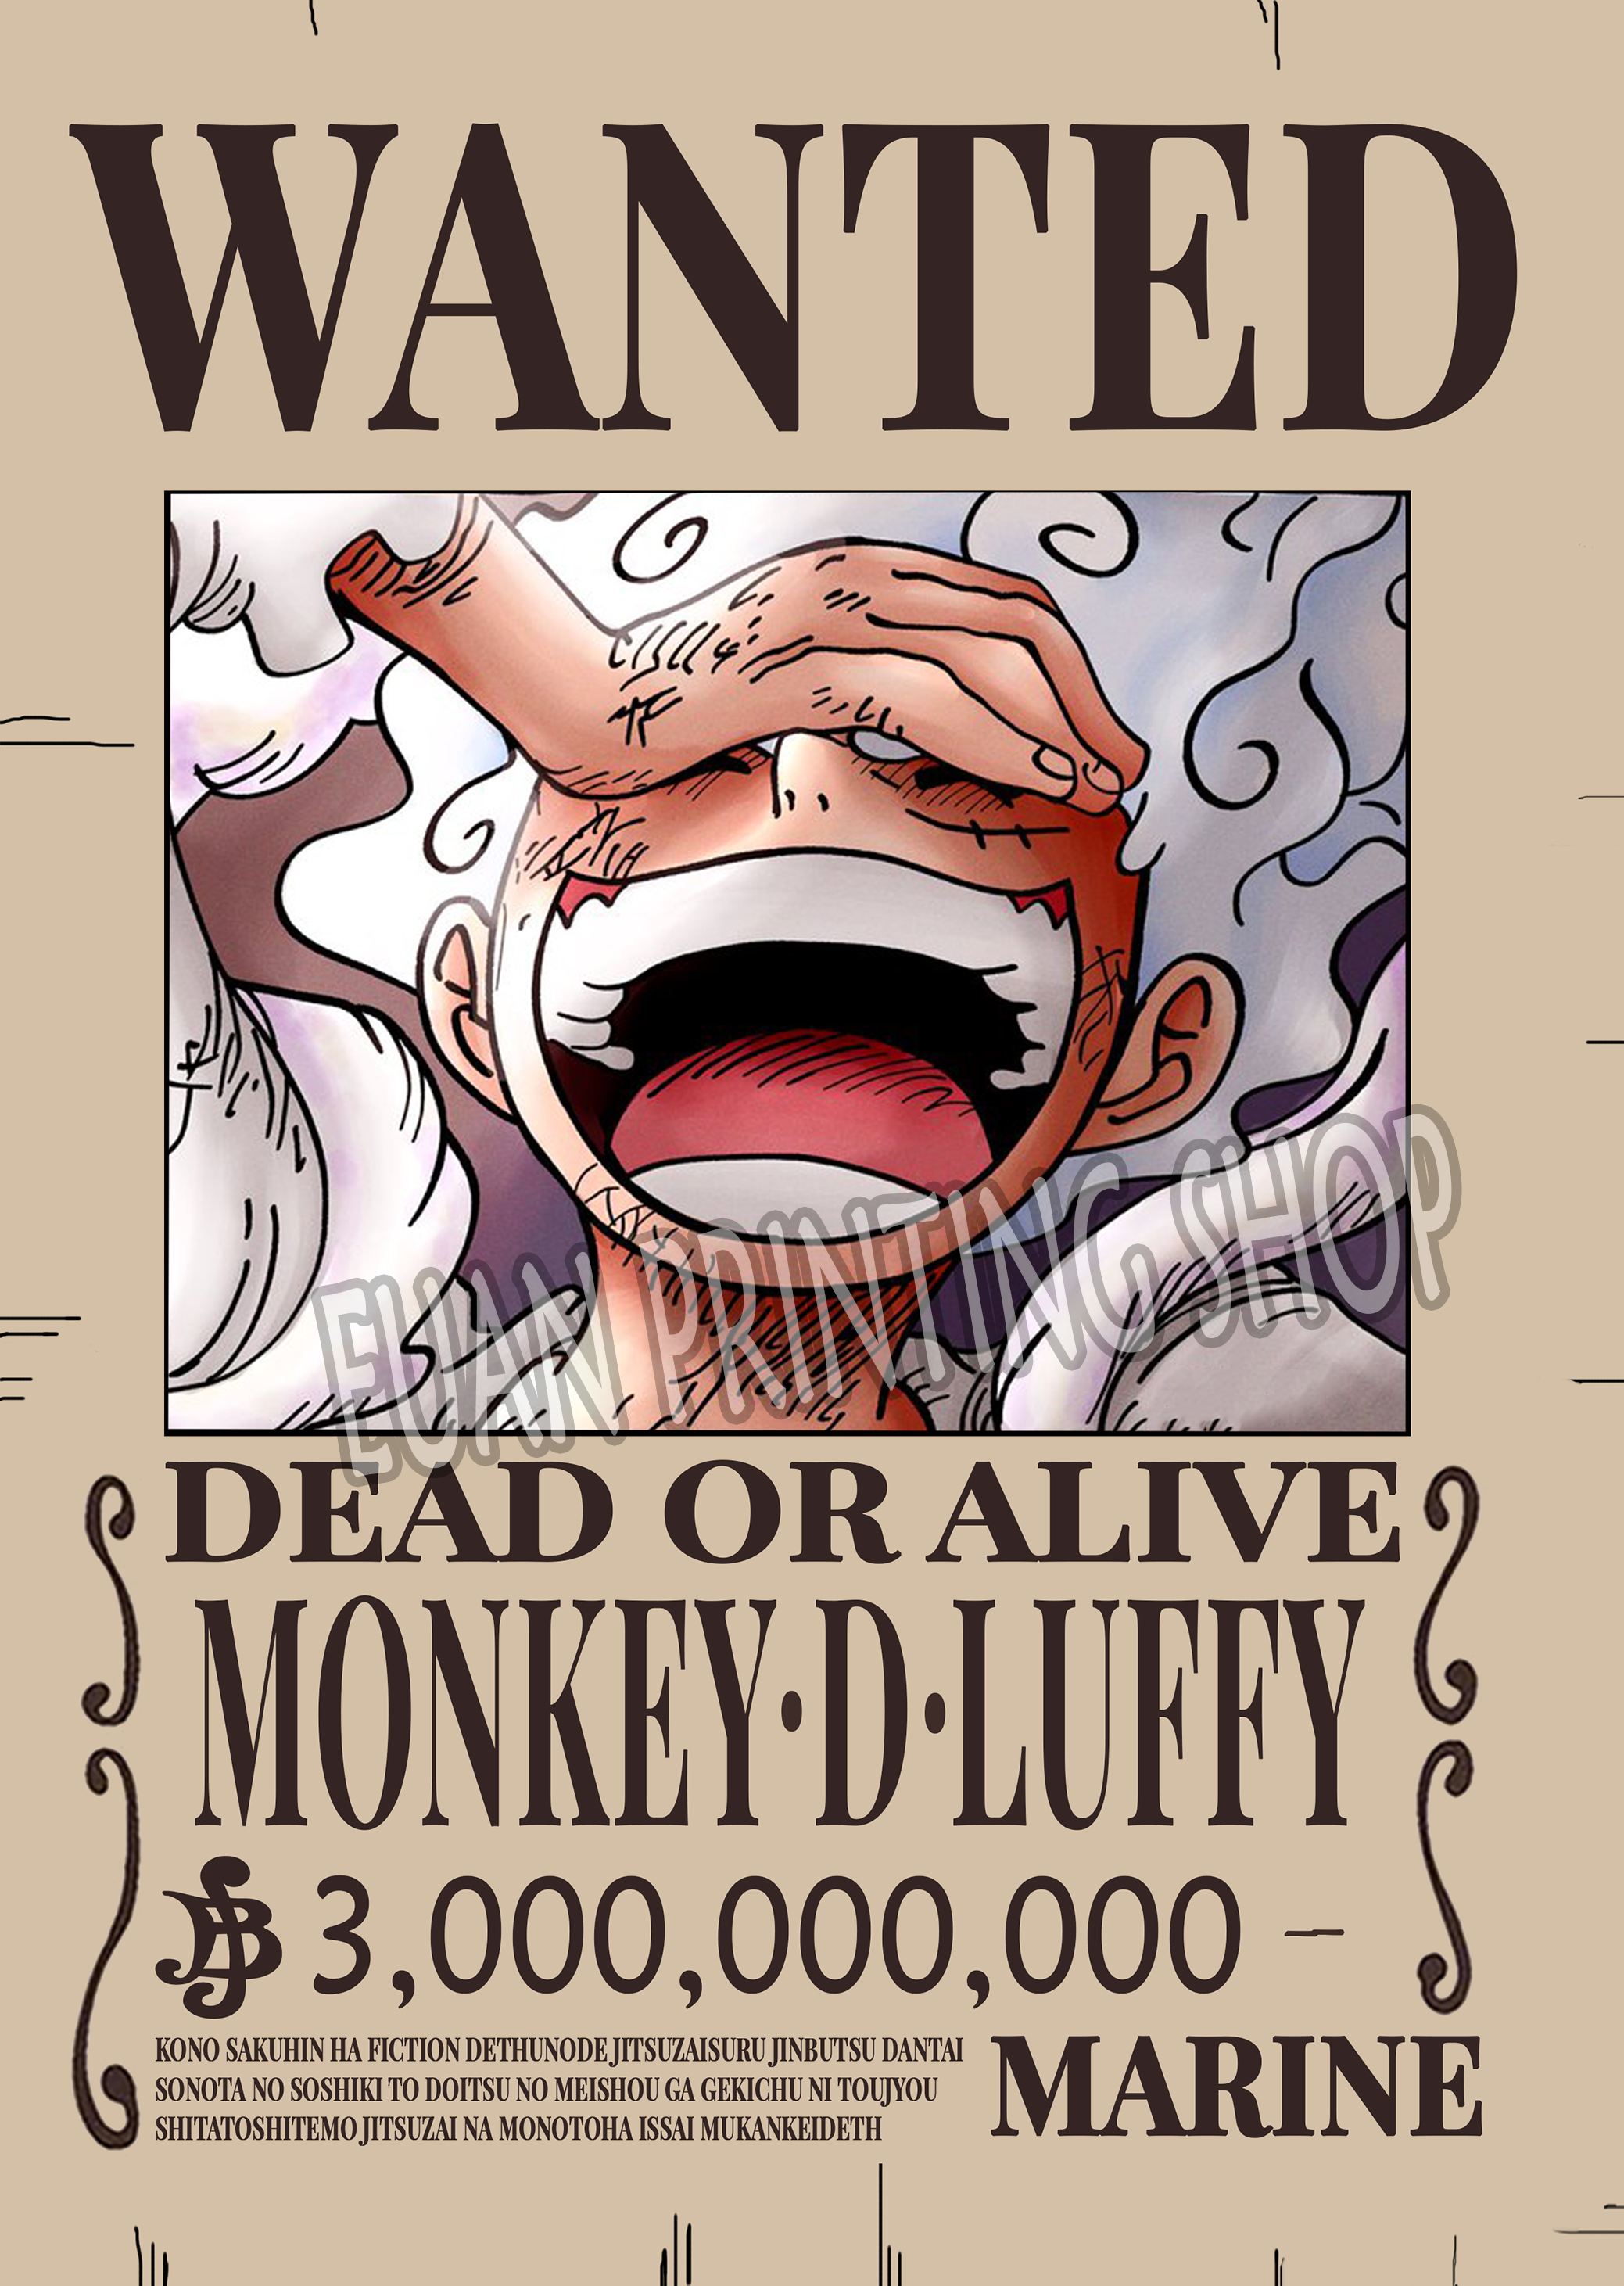 ONE PIECE HD UPDATED BOUNTY WANTED POSTERS 21cm x 29.7cm (3PCS MINIMUM